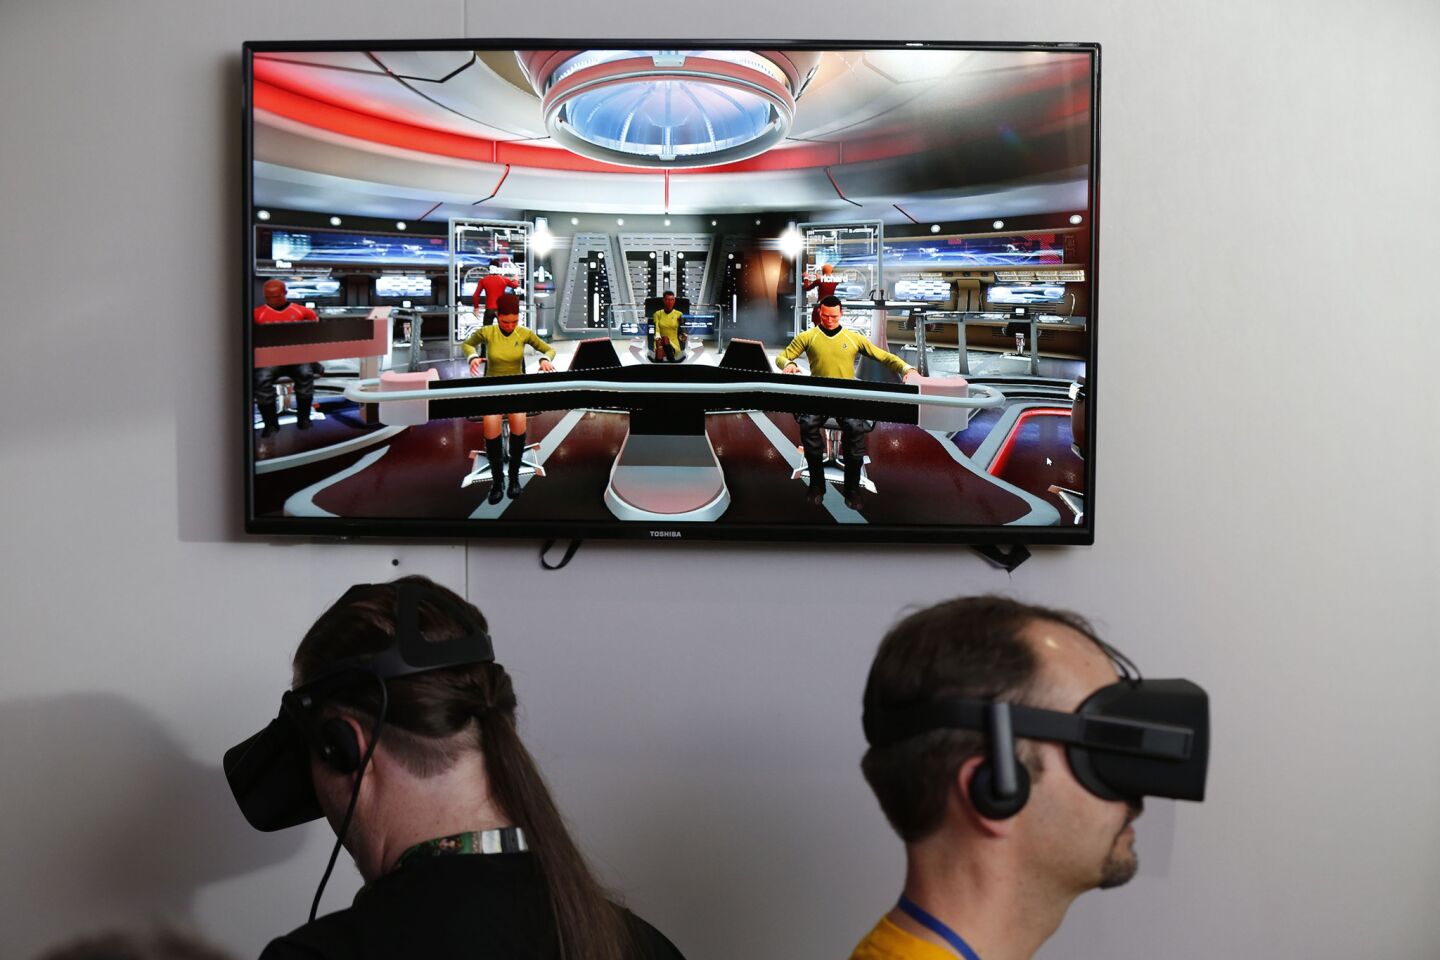 Rus Mclaughlin, left, and Brian Tate play Ubisoft's "Star Trek Bridge Crew" VR video game using the Oculus Rift VR and Oculus touch hand trackers during the Electronic Entertainment Expo.